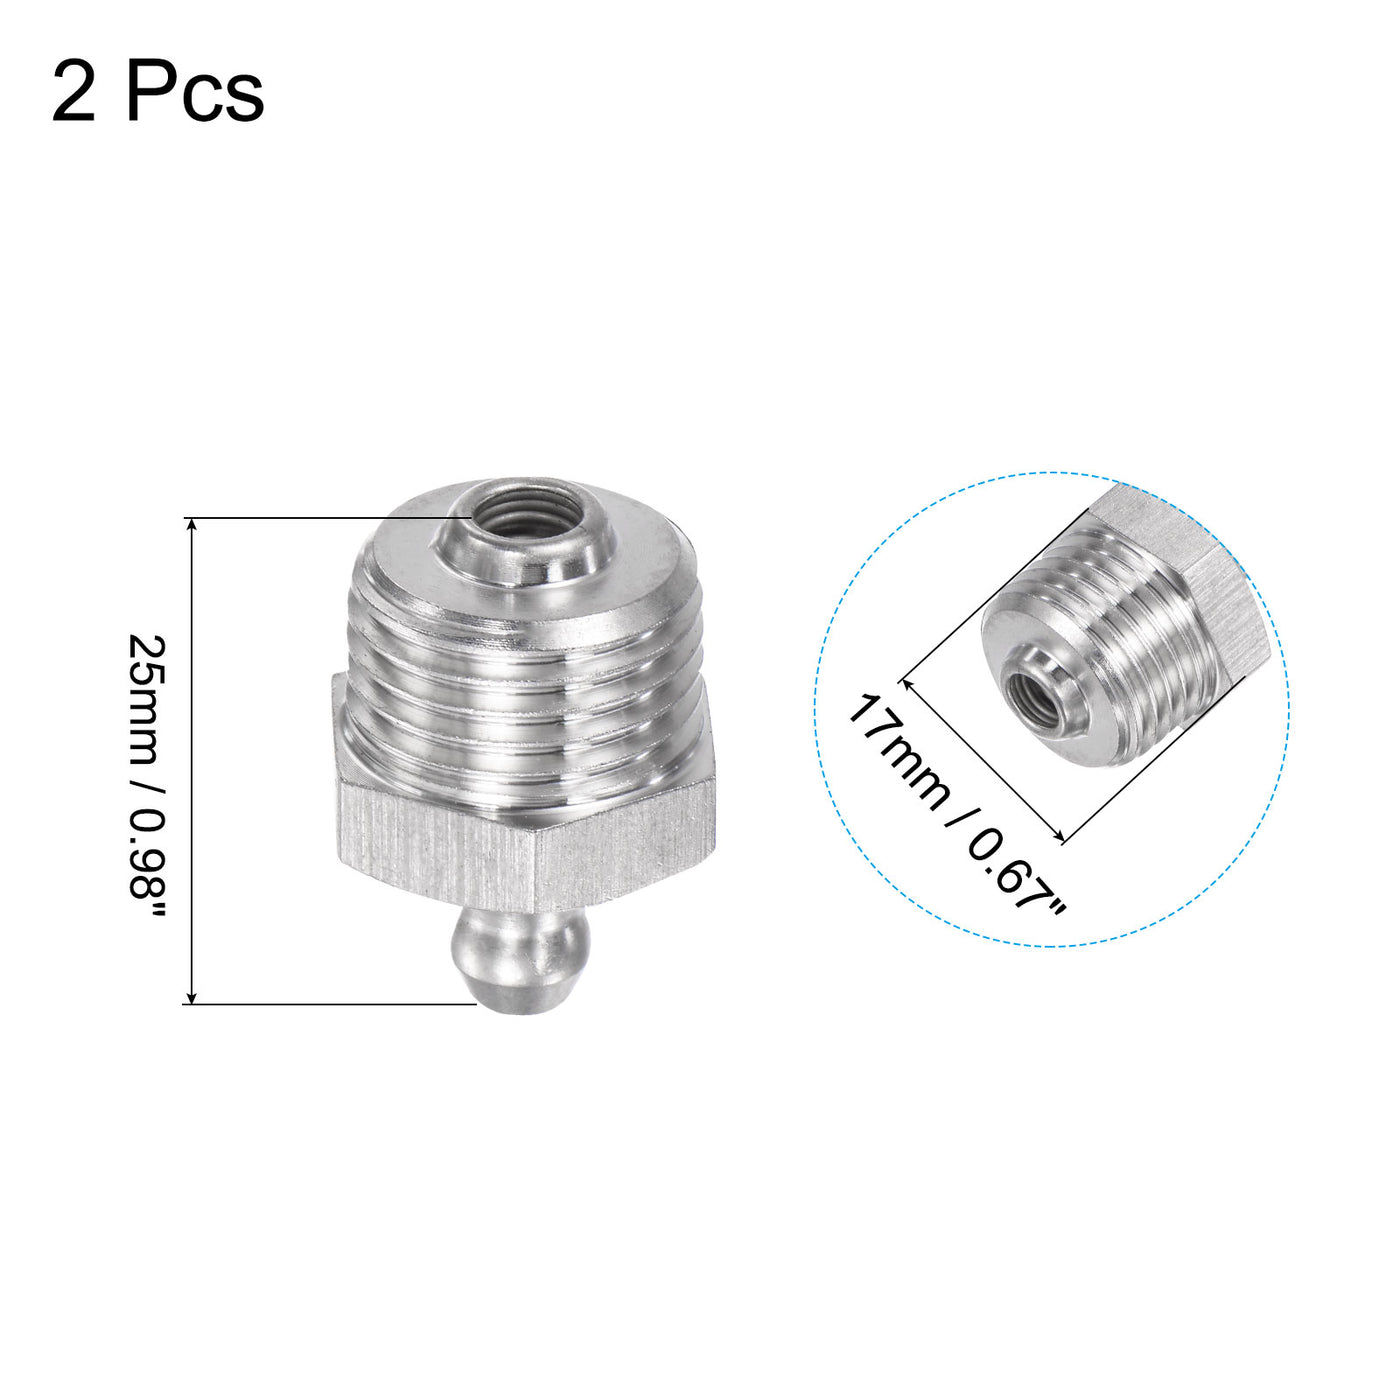 uxcell Uxcell 2Pcs Metric Stainless Steel Straight Hydraulic Grease Fitting M16 x 1.5mm Thread